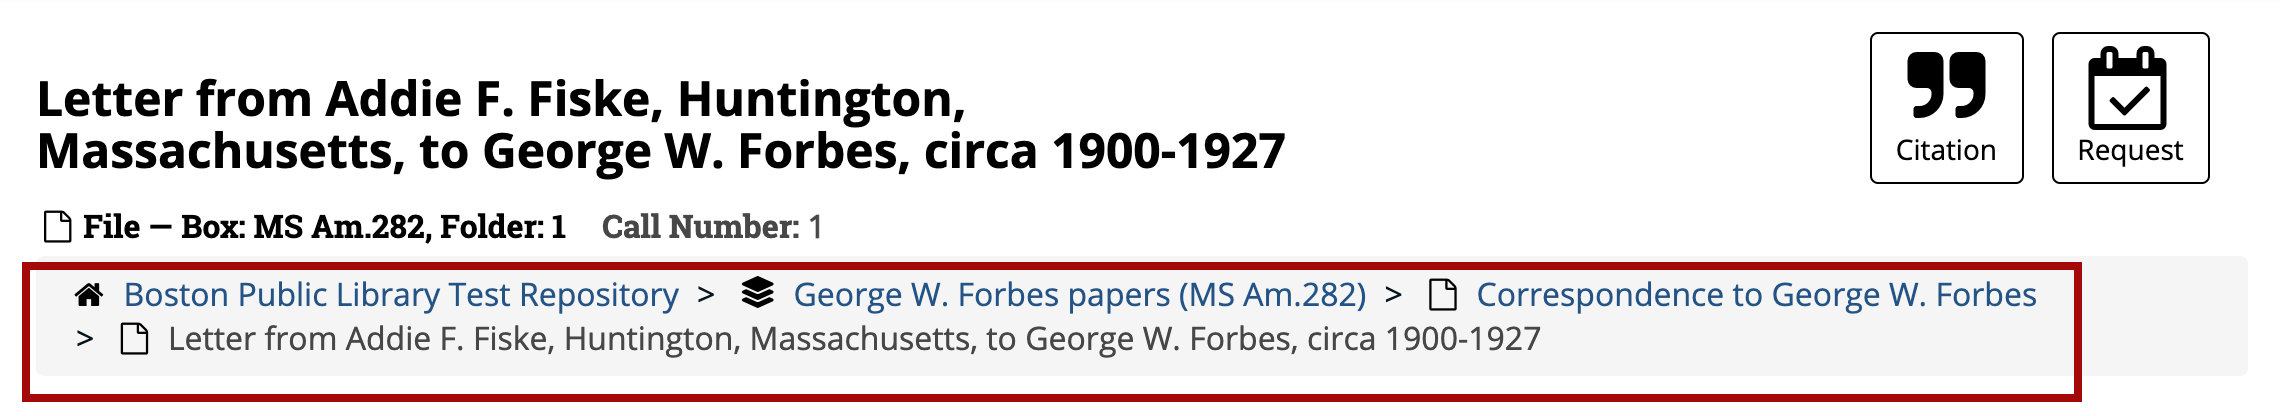 Screenshot of collection breadcrumbs on an example item record page for the George W. Forbes papers